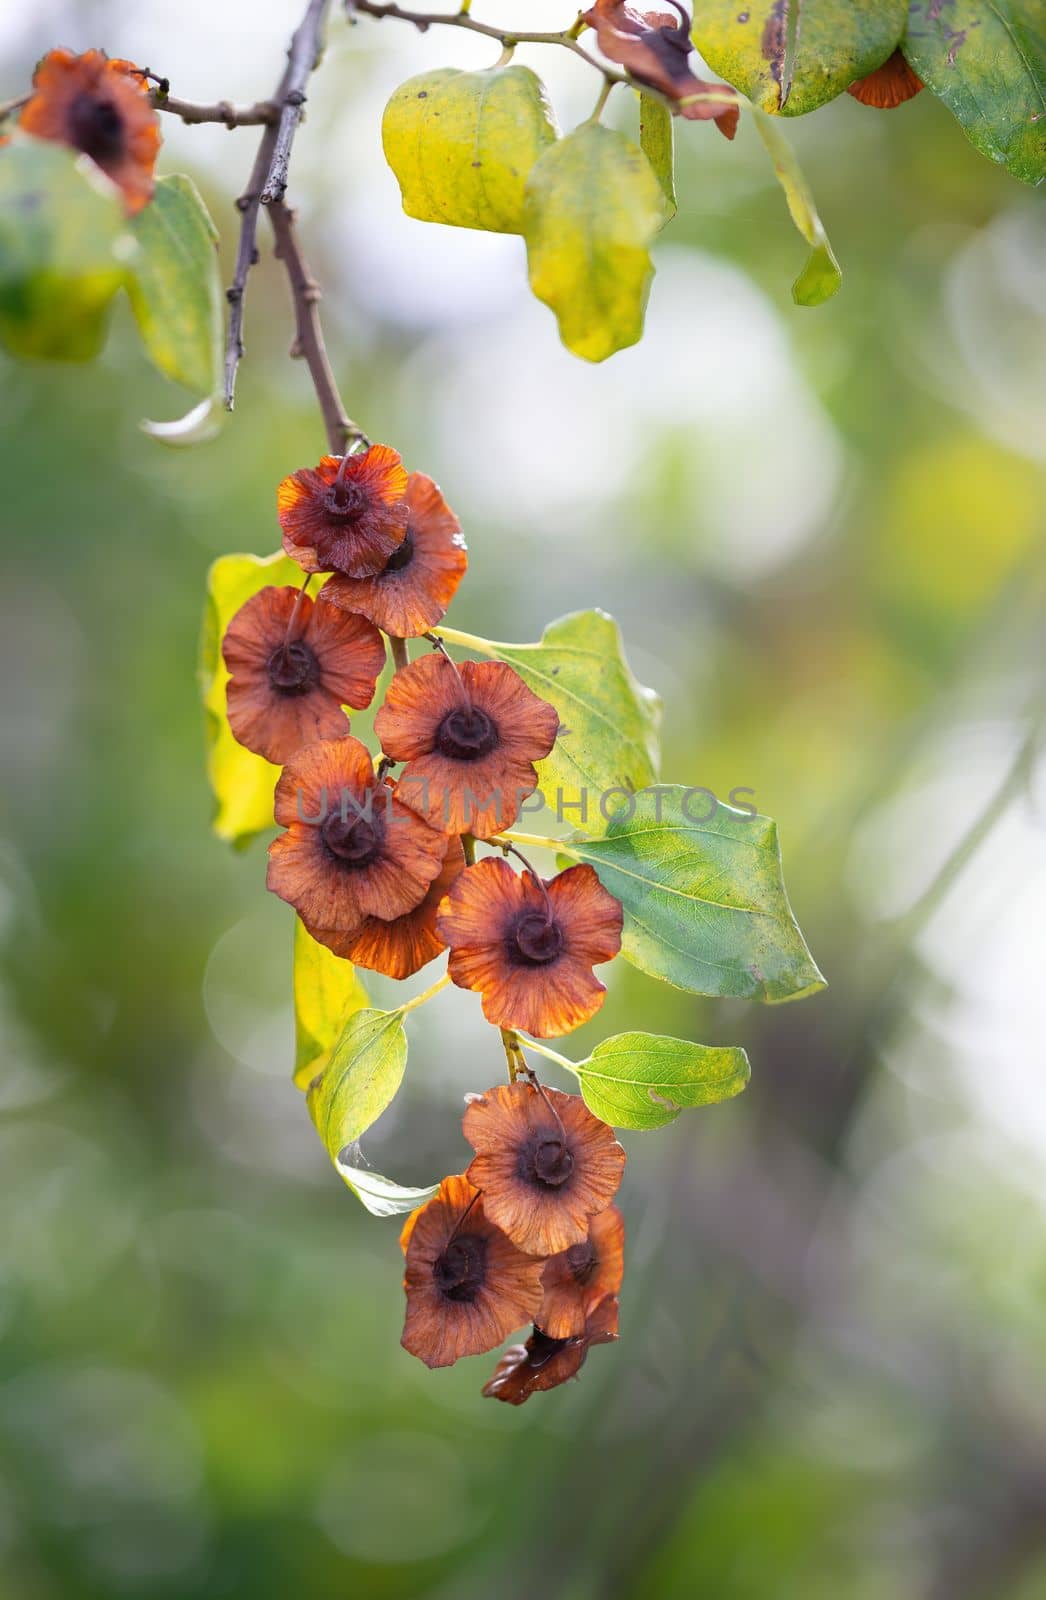 Paliurus spina-christi fruits, commonly known as Jerusalem thorn, garland thorn, Christ's thorn, or crown of thorns, in the Marche region of Italy near Pesaro and Urbino in Montefeltro